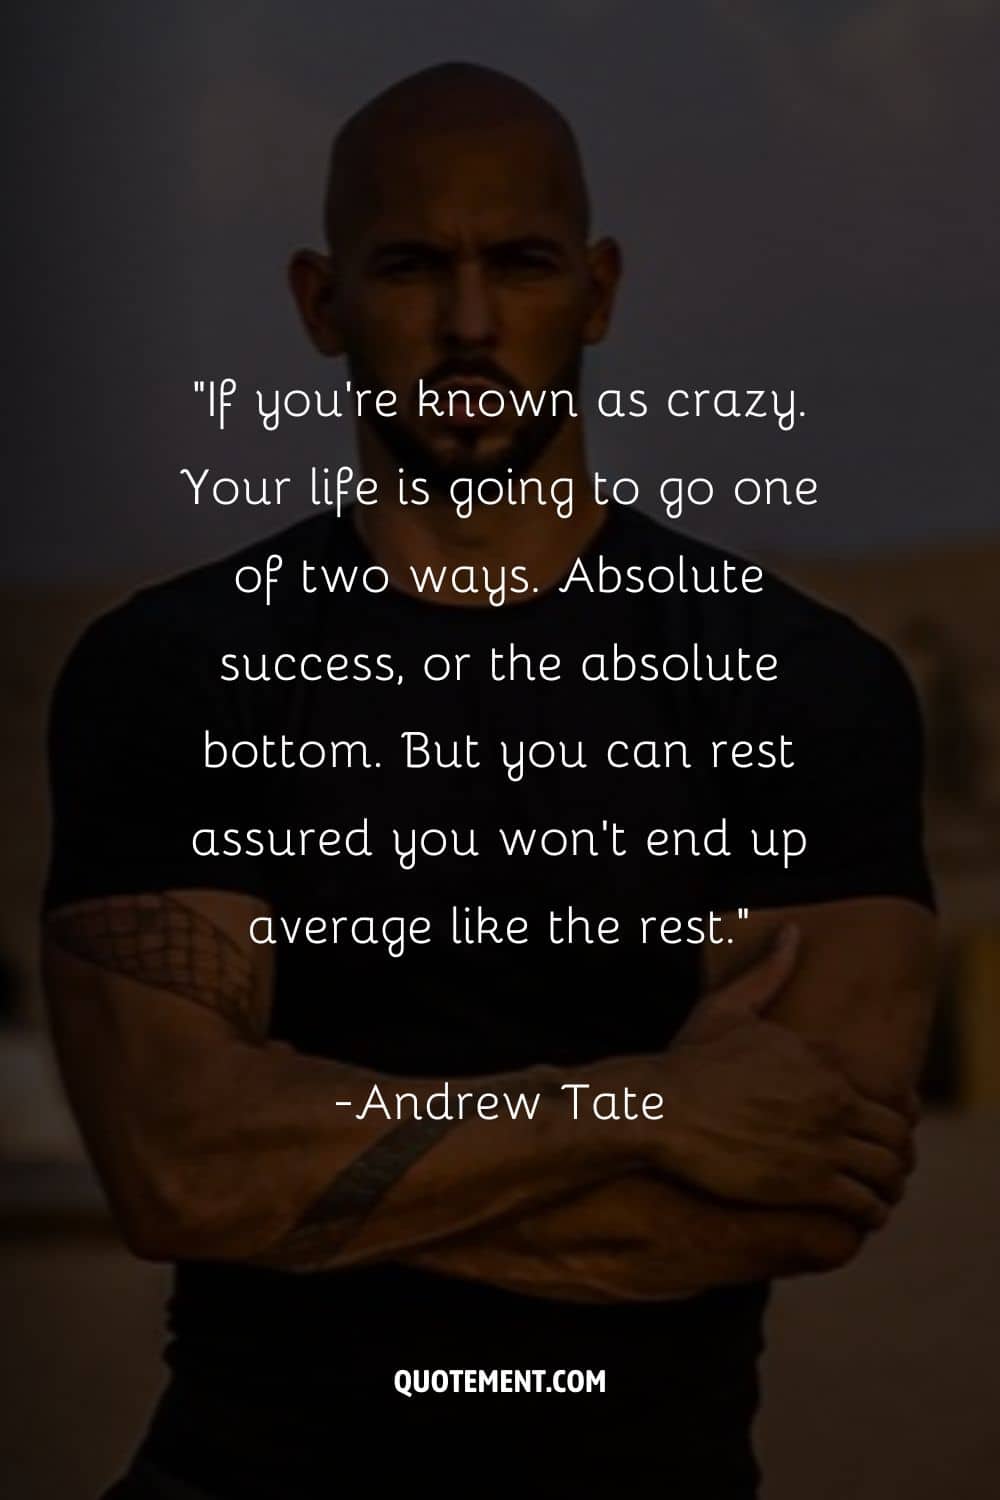 “If you’re known as crazy. Your life is going to go one of two ways. Absolute success, or the absolute bottom. But you can rest assured you won’t end up average like the rest.”